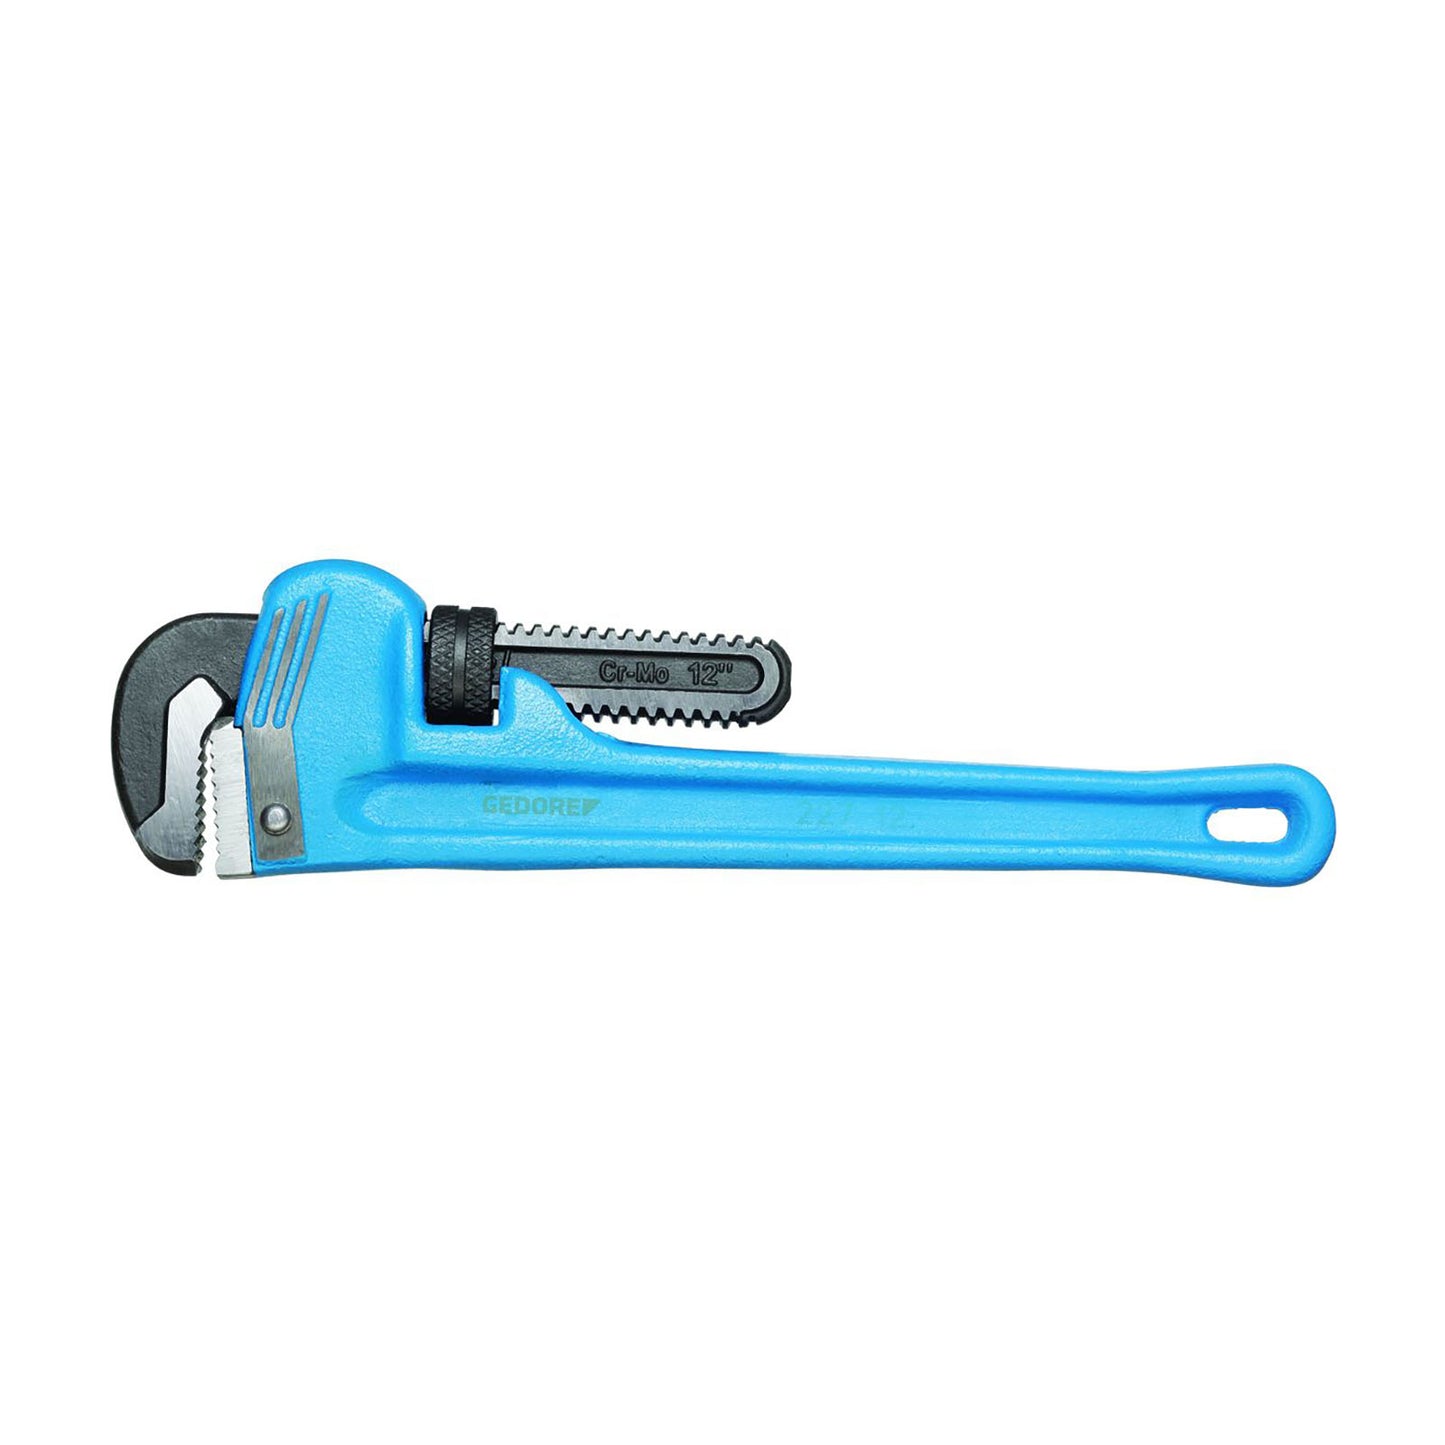 GEDORE 227 8 - Rf 227 Pipe Wrench 8 (6453030)